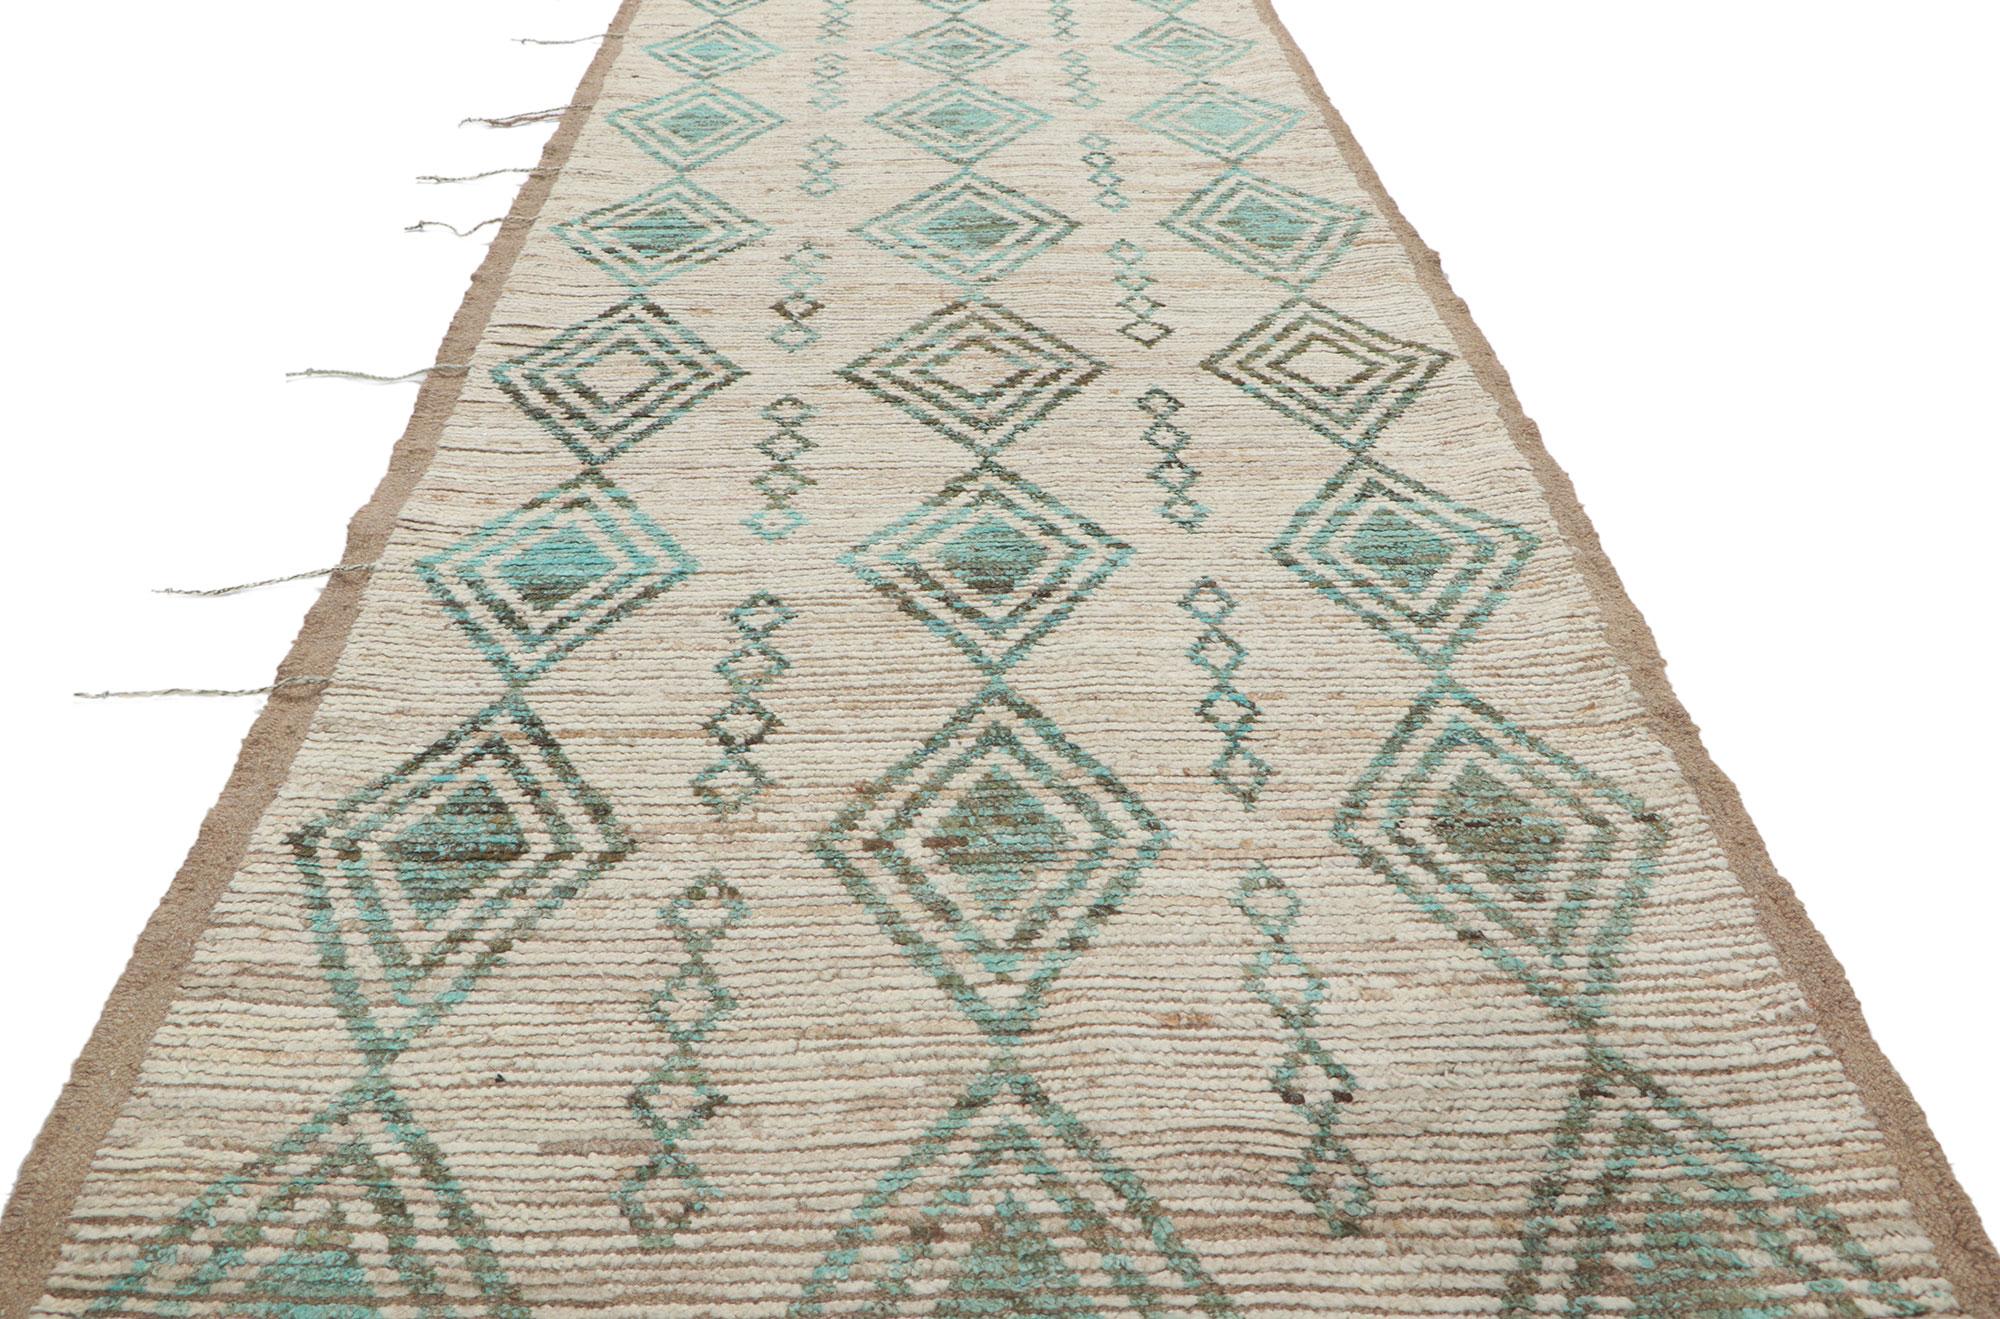 Pakistani New Contemporary Moroccan Style Runner with Short Pile For Sale